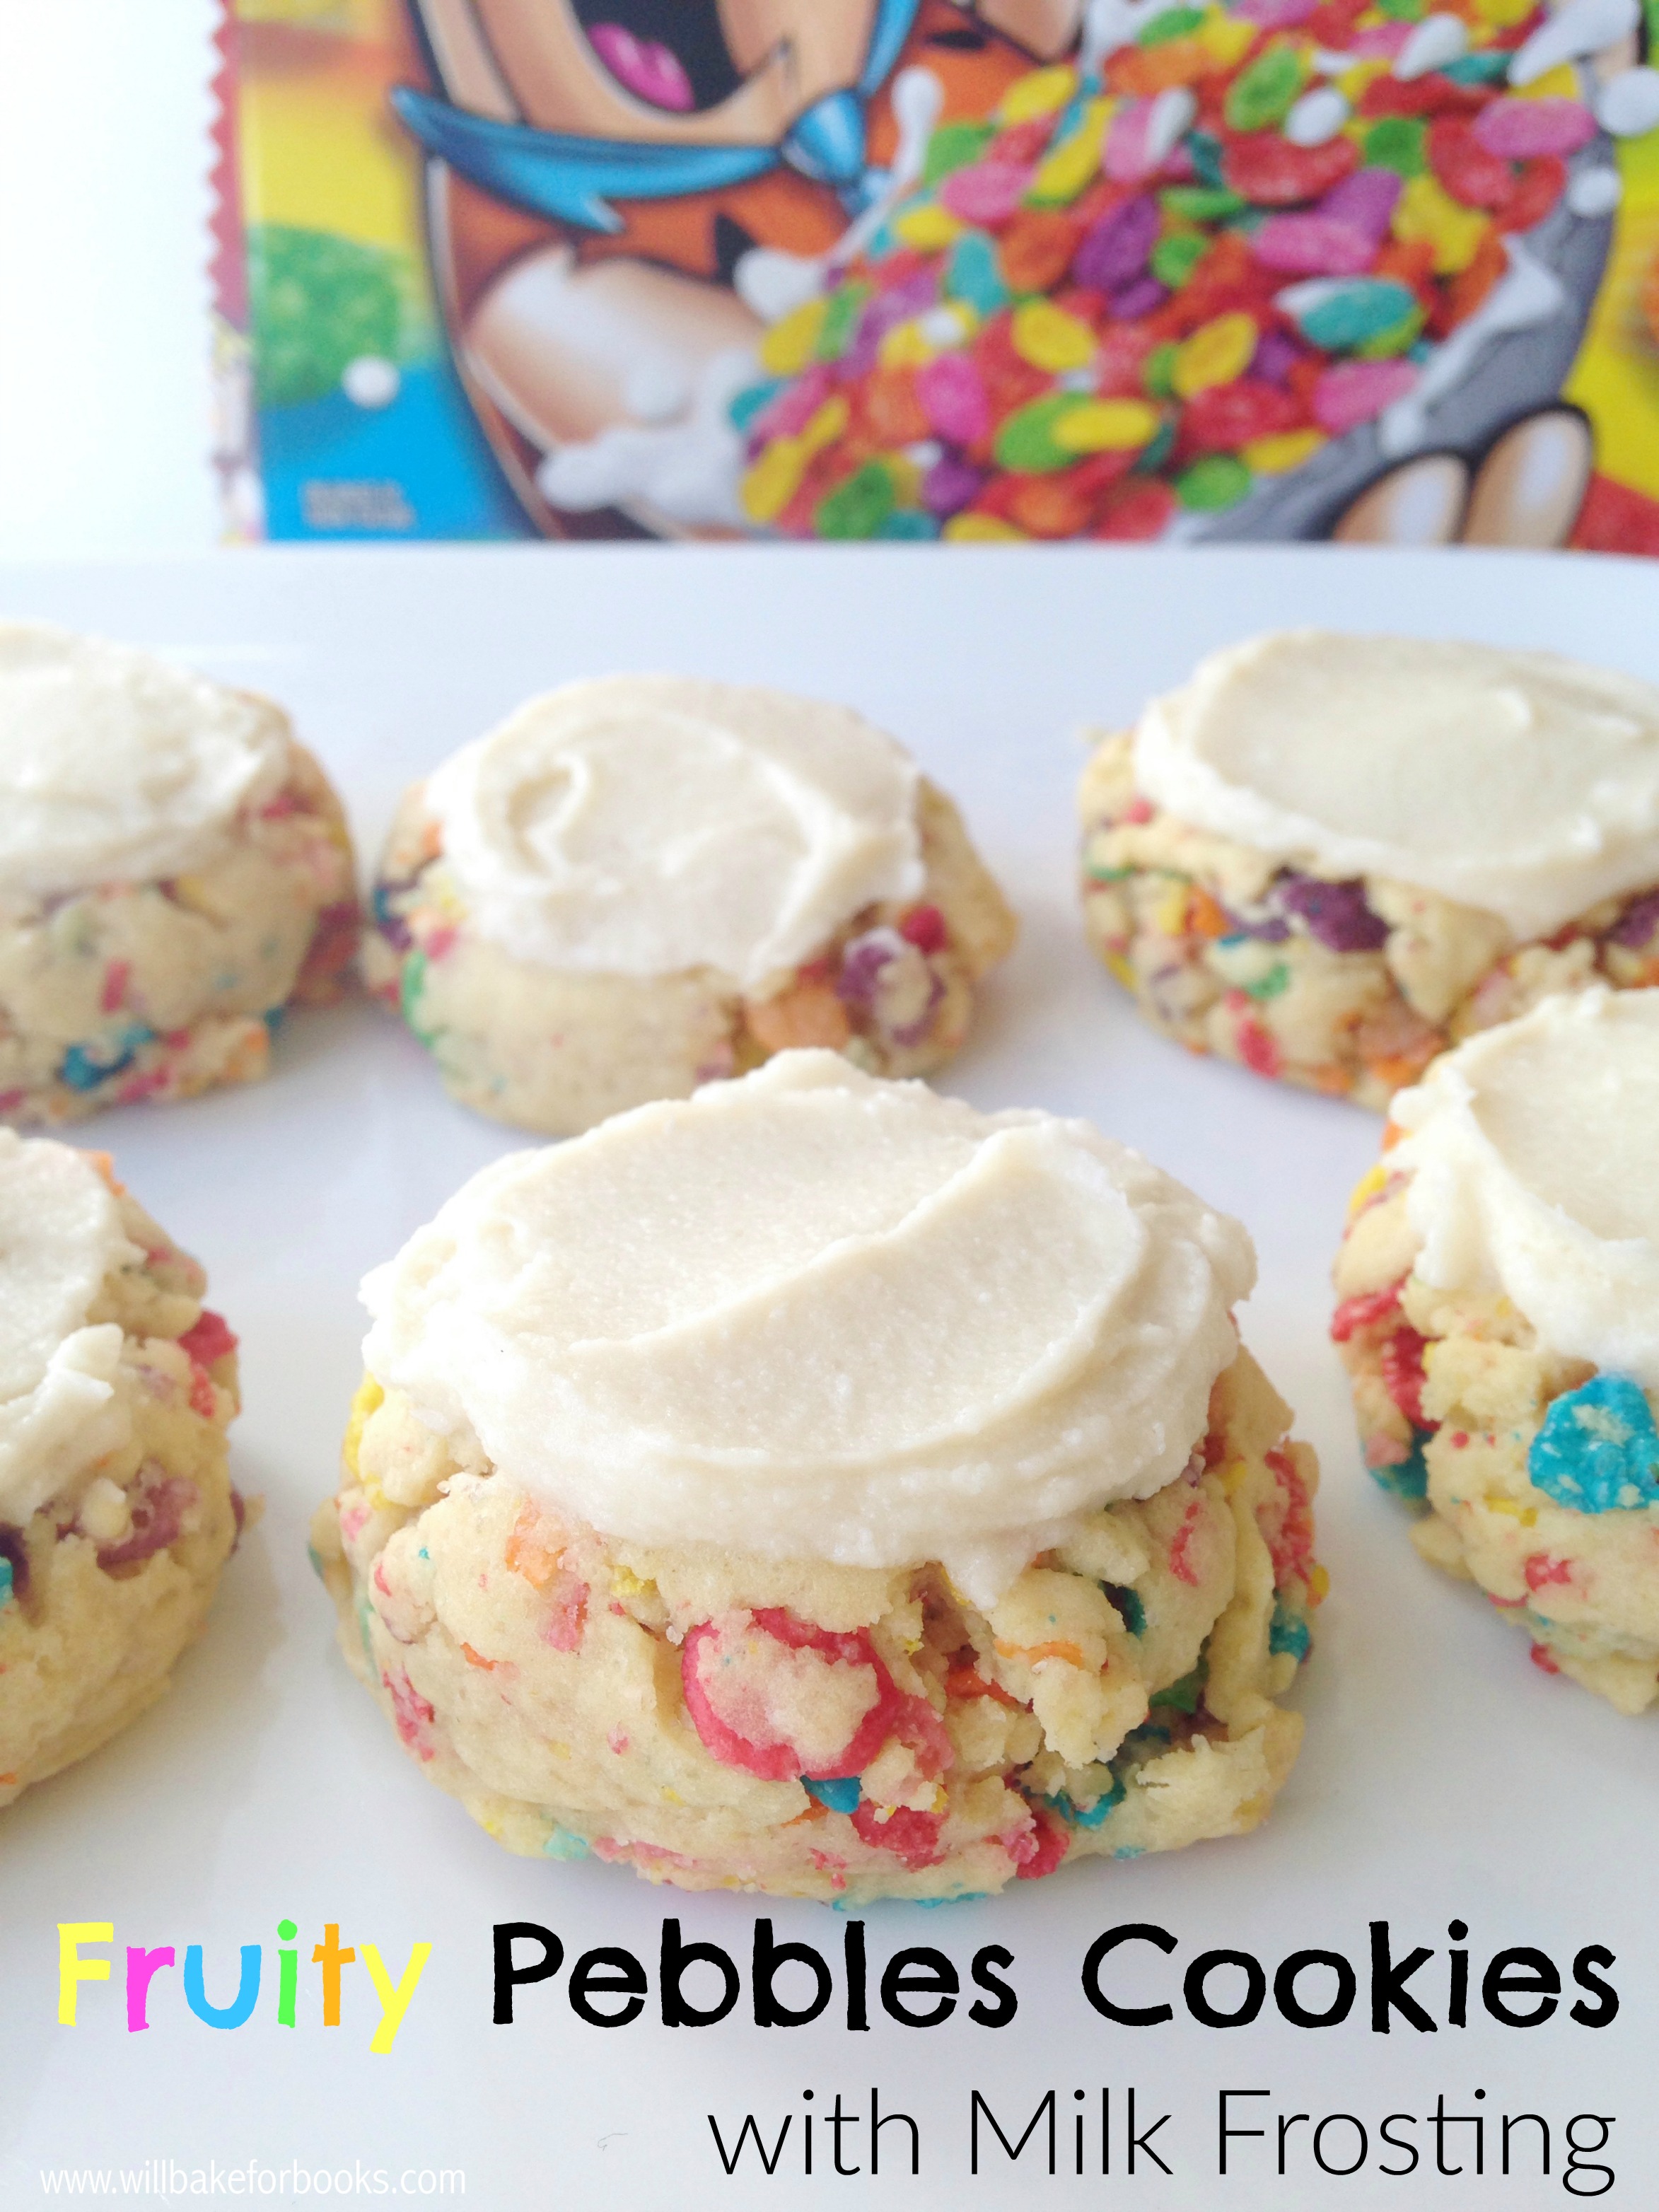 Fruity Pebbles Cookies with Milk Frosting on www.willbakeforbooks.com